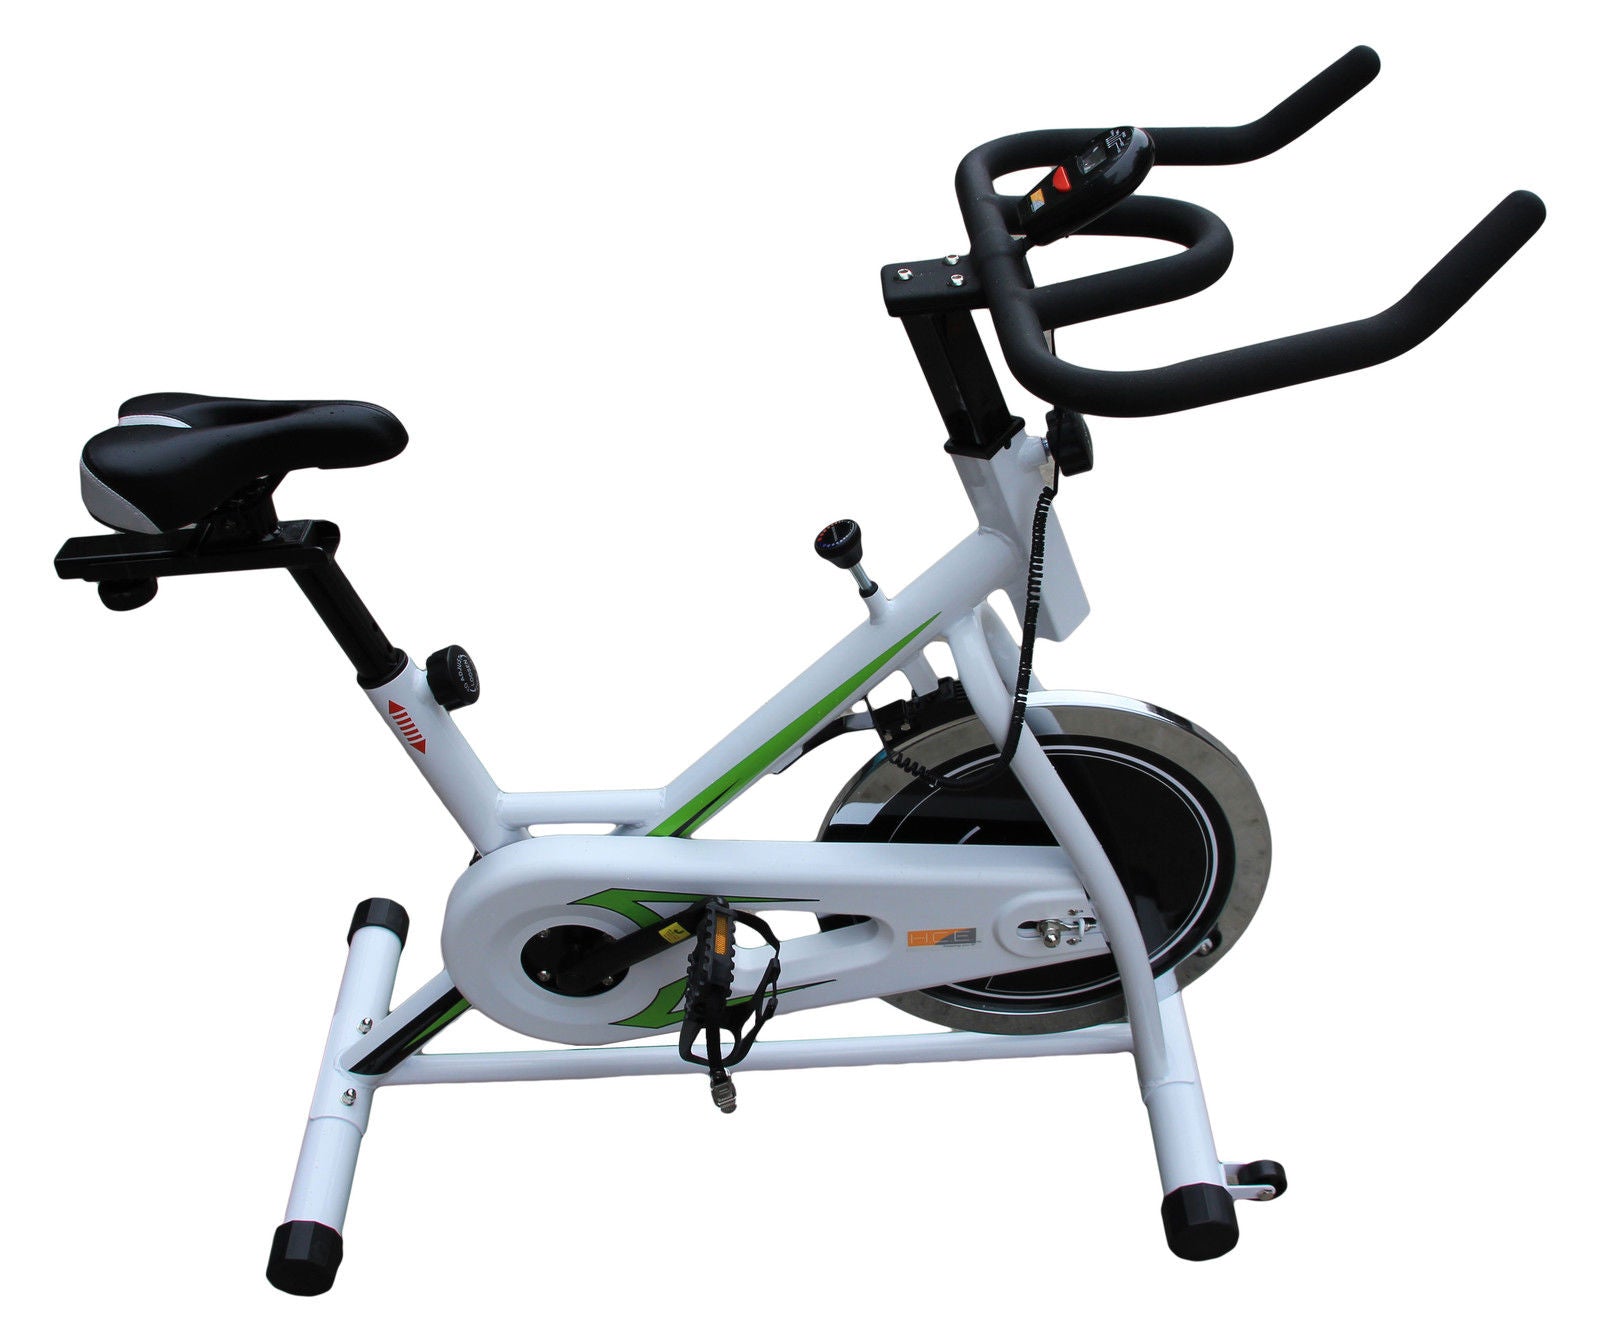 OZ Commercial Spin Flywheel Bike Fully Adjustable For Home Gym Fitness Exercise